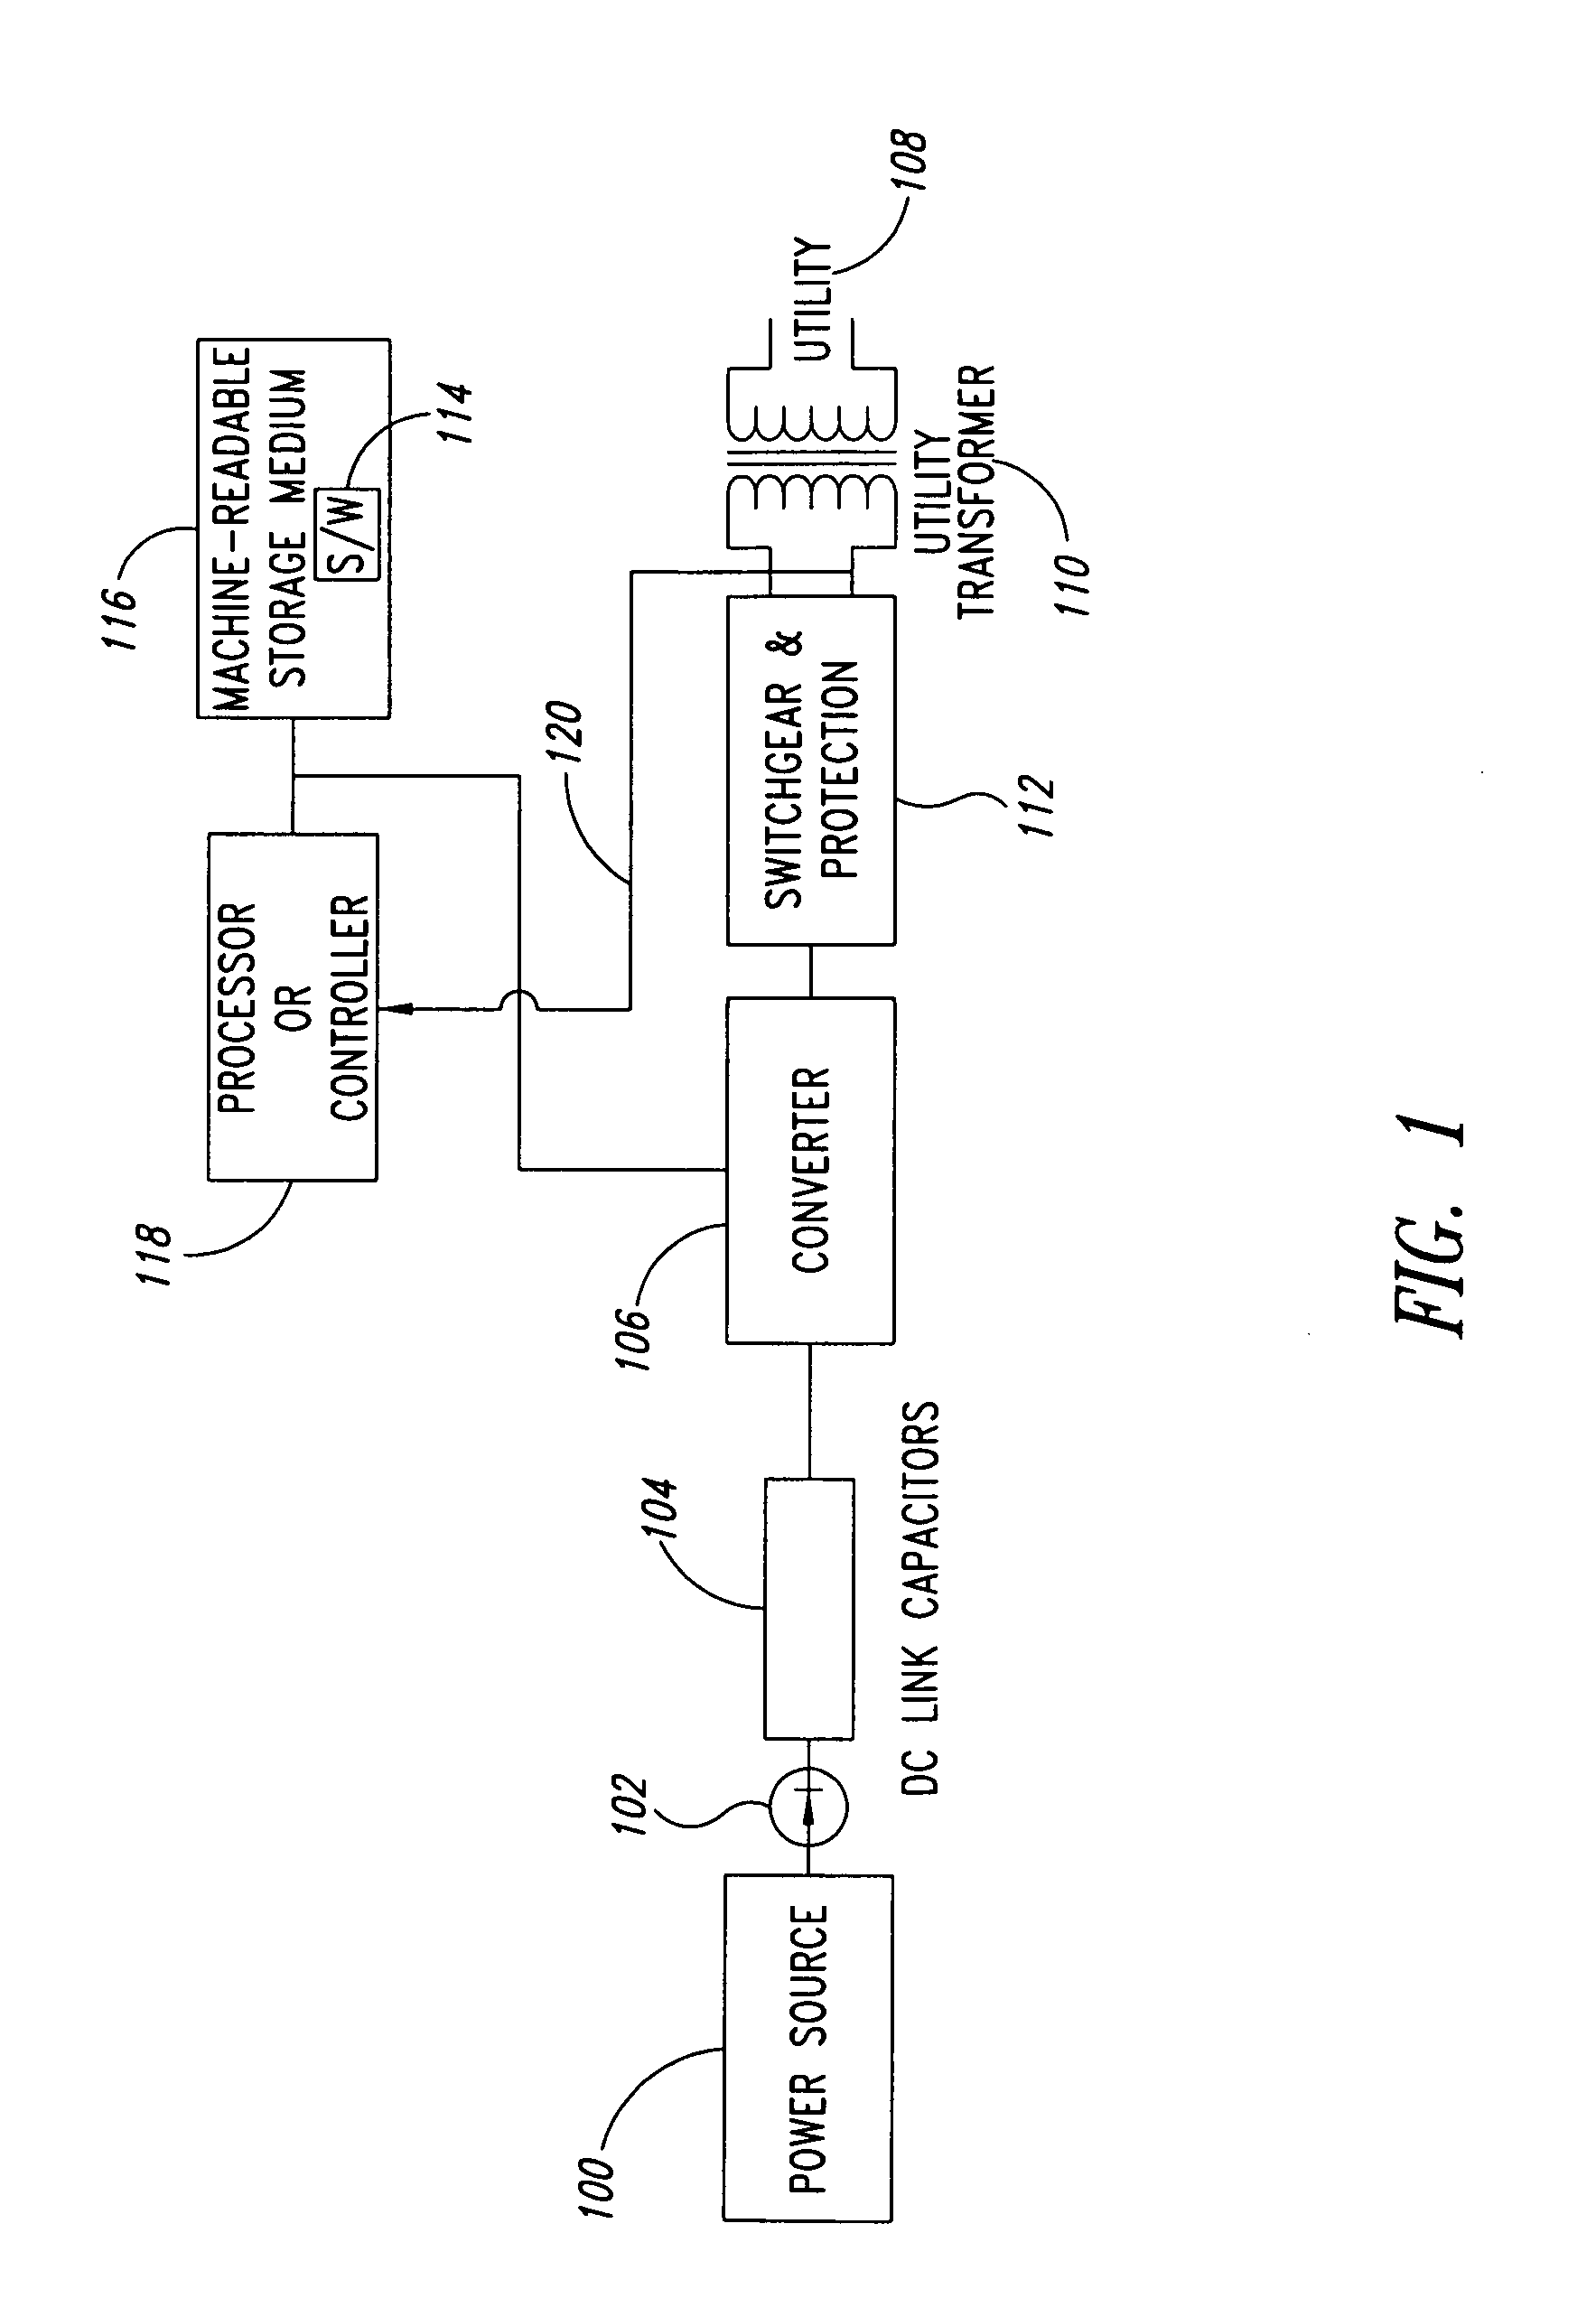 Method for determining RMS values for grid-linked converters